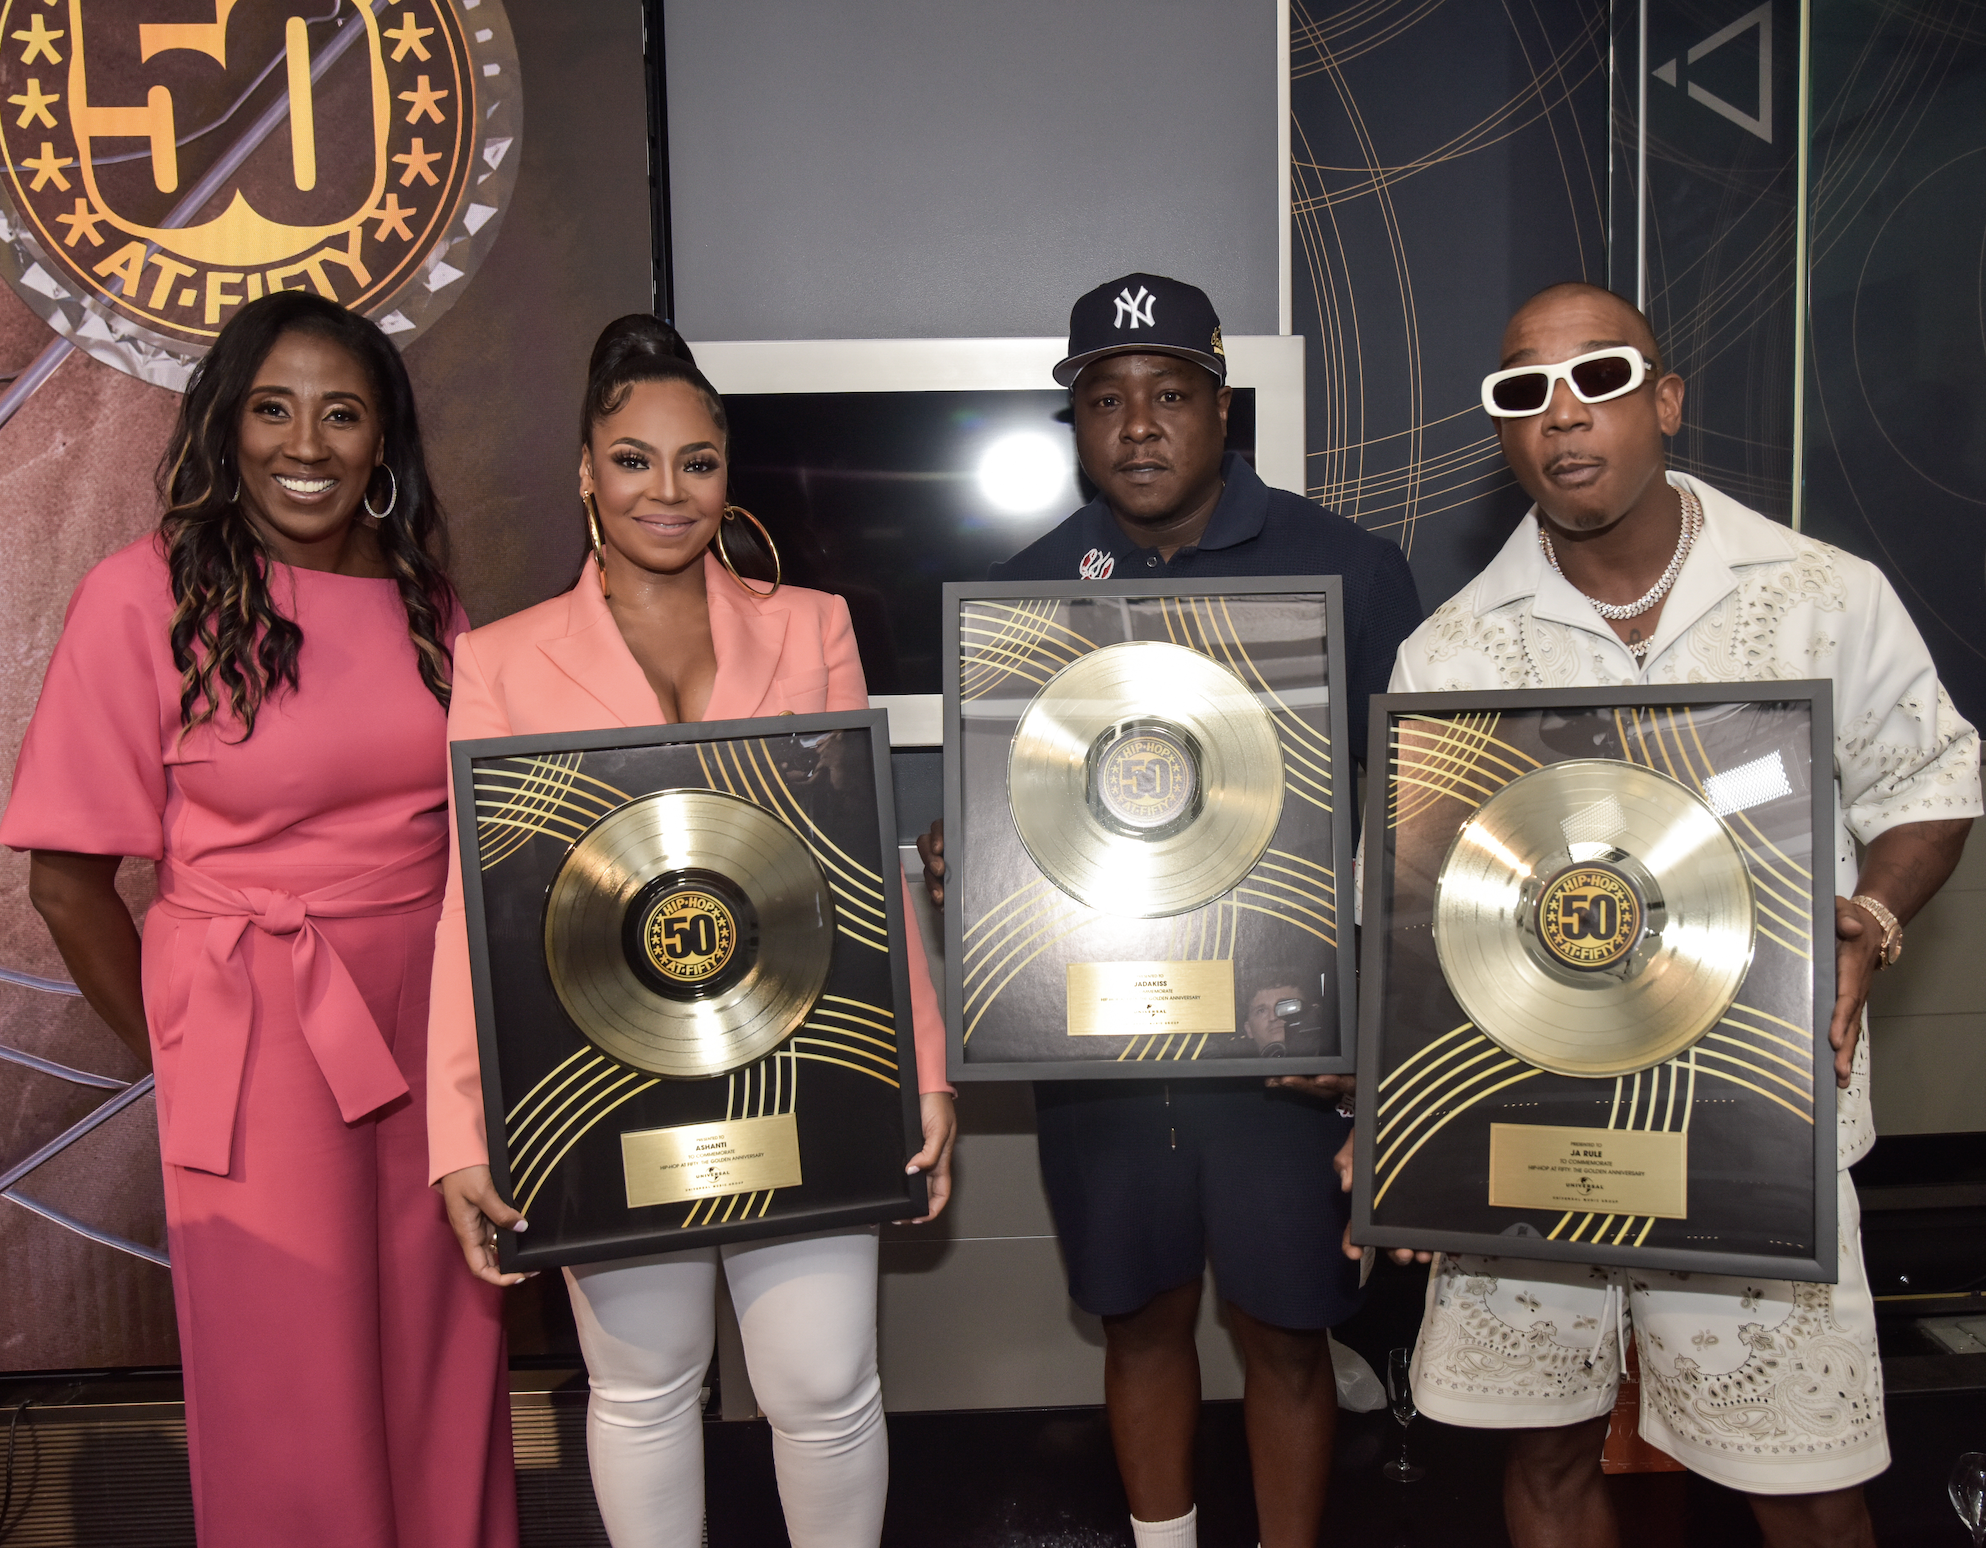 Hard Rock Hotel Inducts Ja Rule Into Memorabilia Collection in Celebration  of Hip-Hop's 50th Anniversary - ENSPIRE Magazine